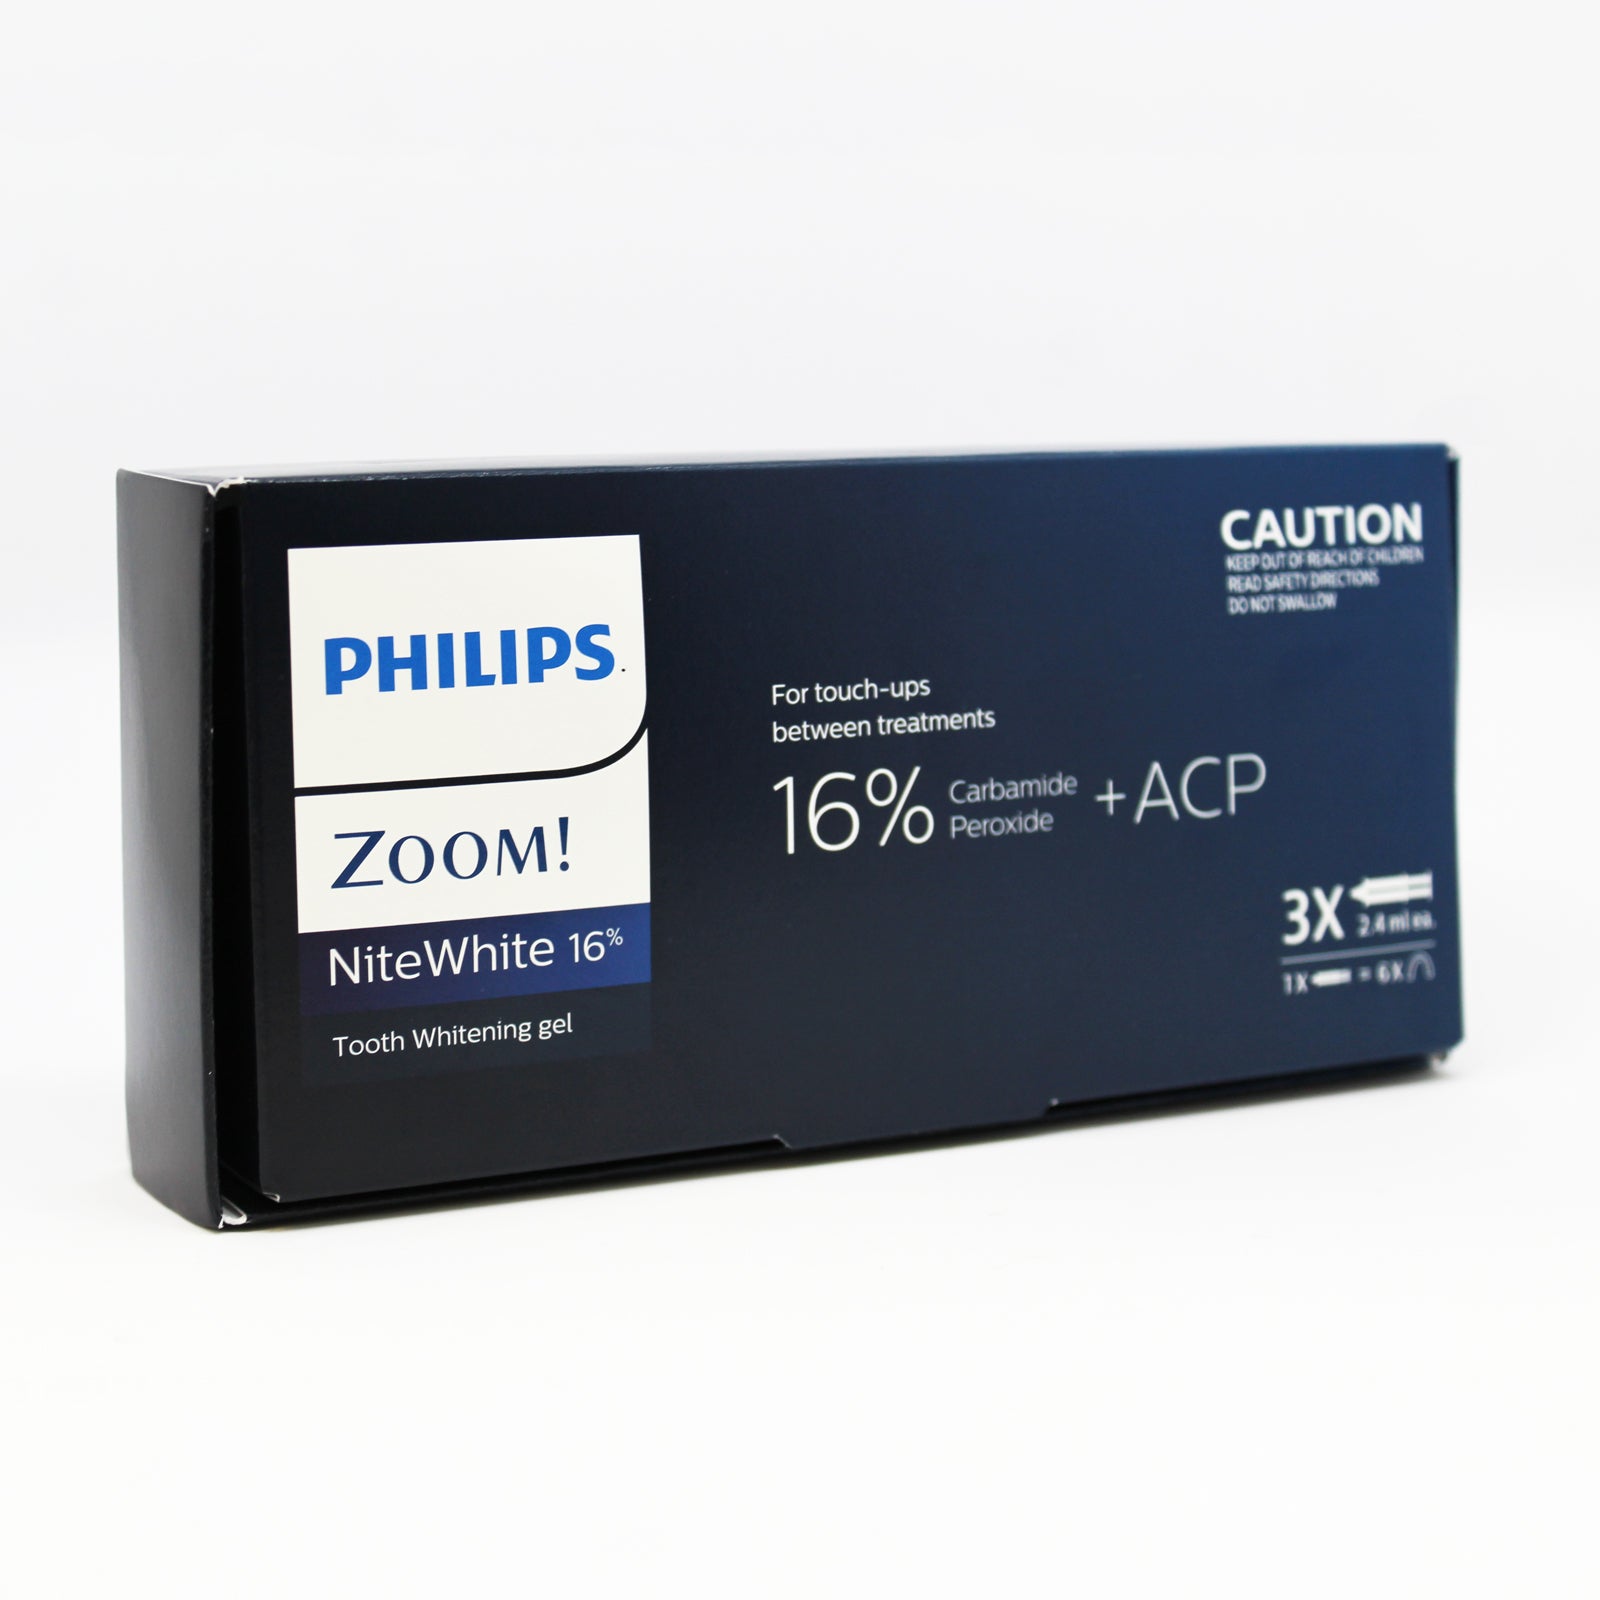 Philips Zoom 16% Nite White Carbamide Peroxide Teeth Whitening Gel Kit - 3 x 2.4gram Syringes - Instructions and Shade Guide Included